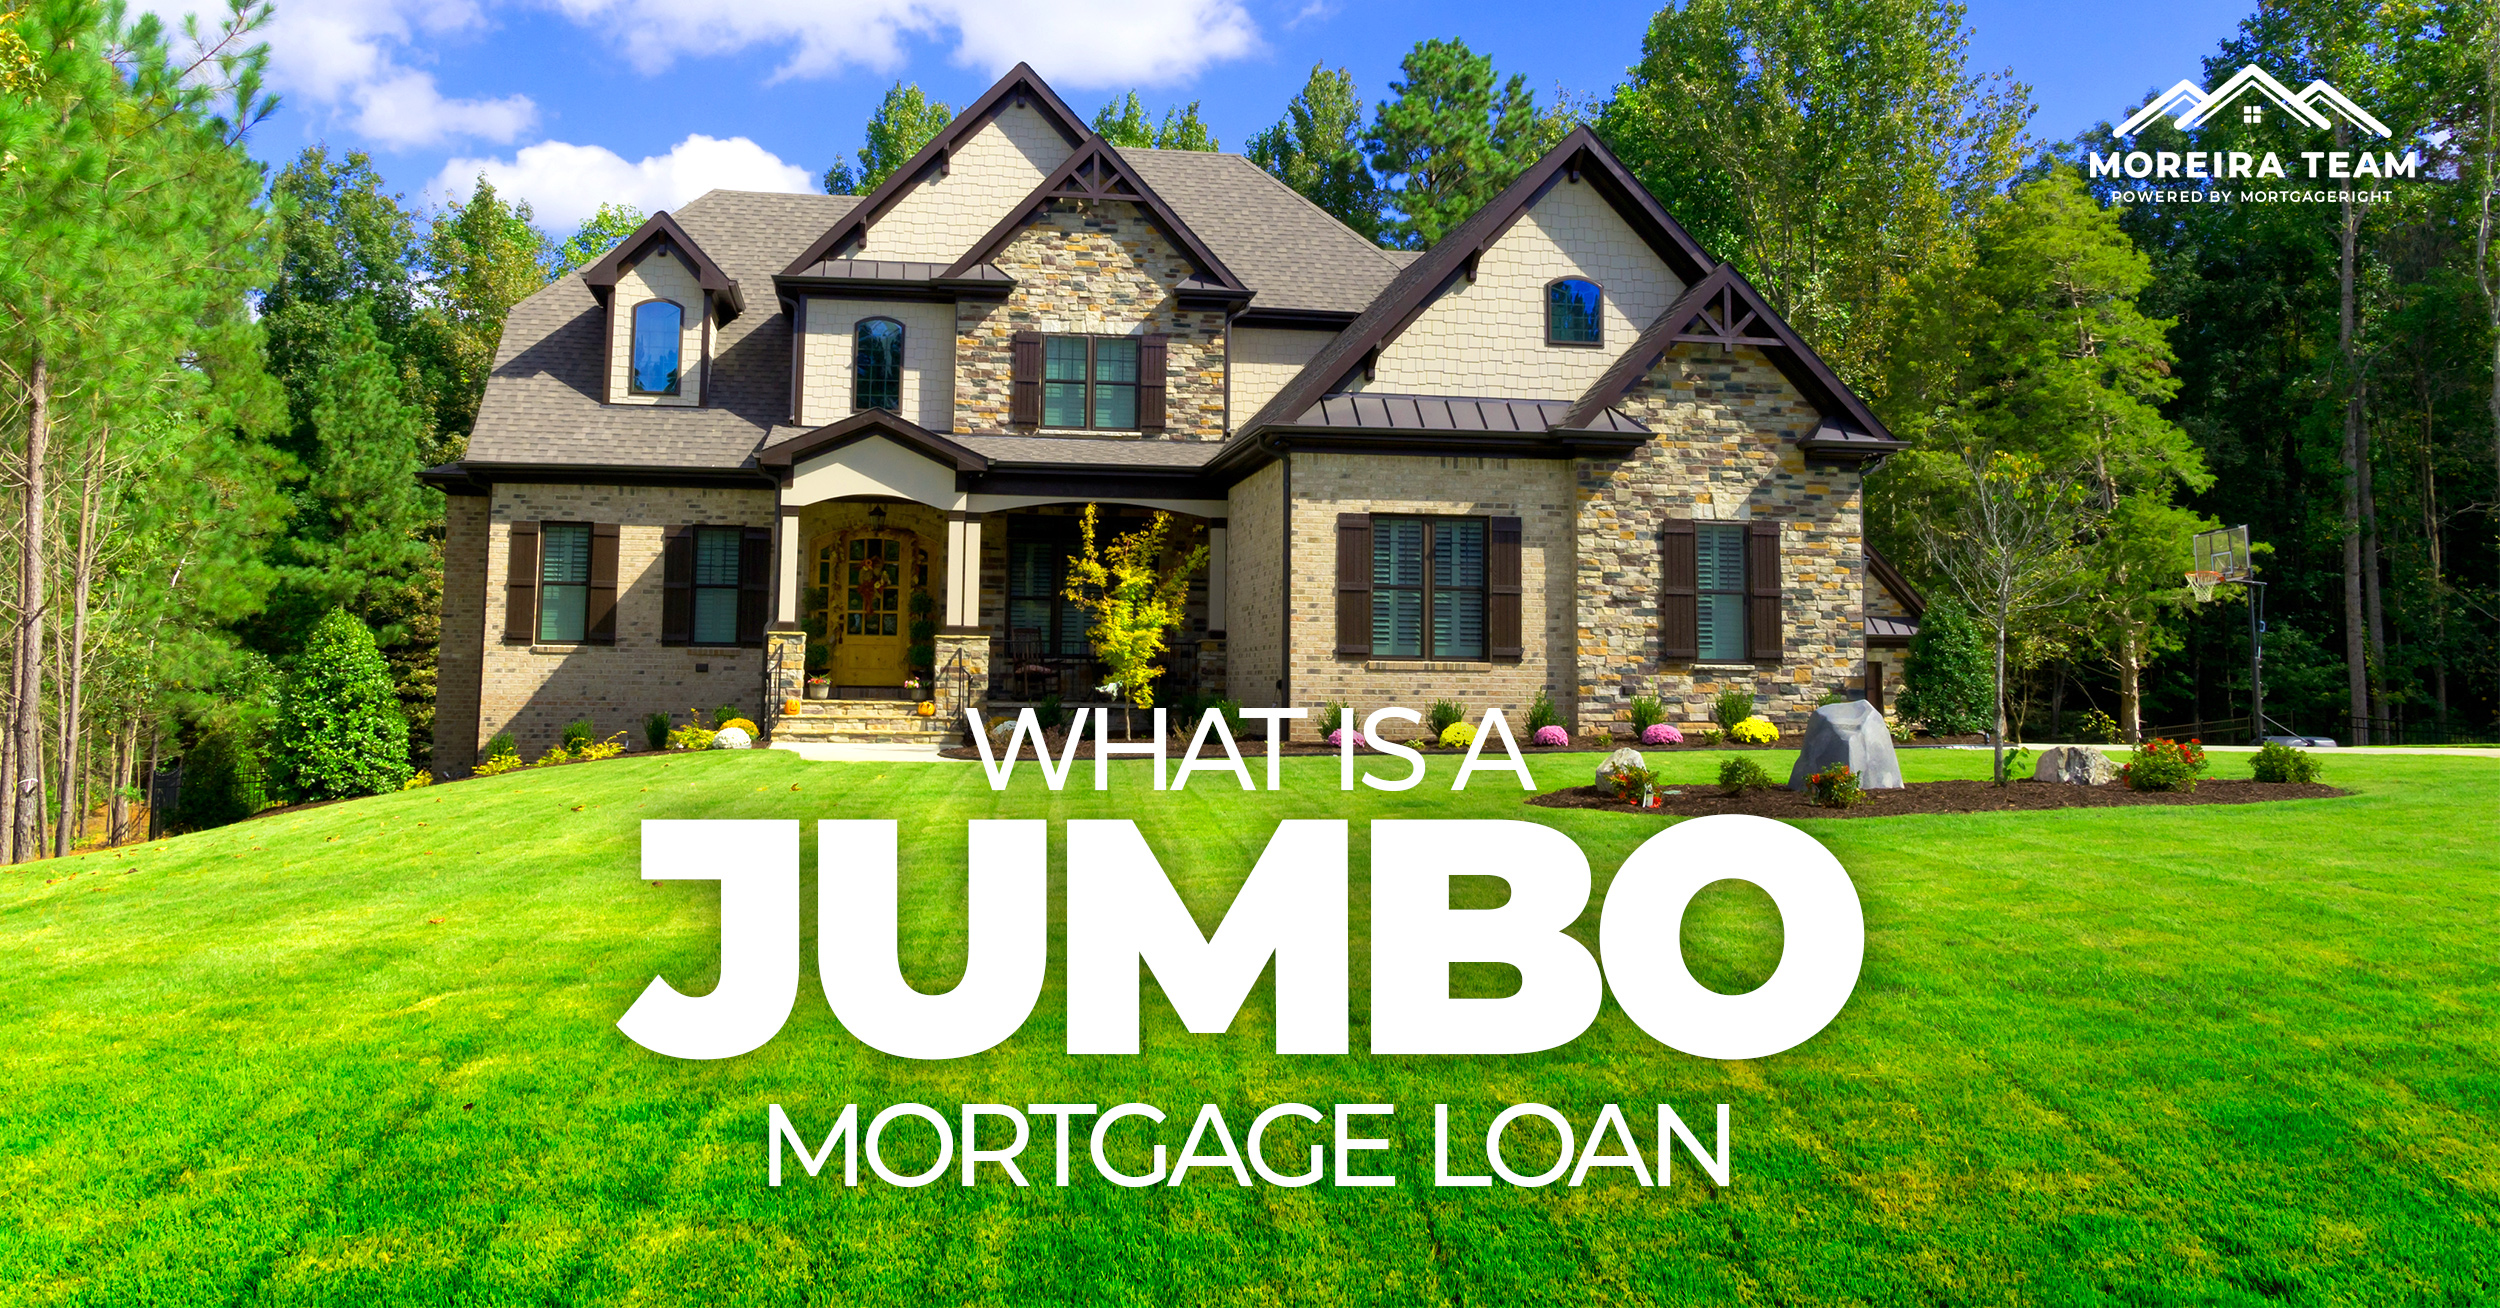 What is a Jumbo Mortgage Loan?